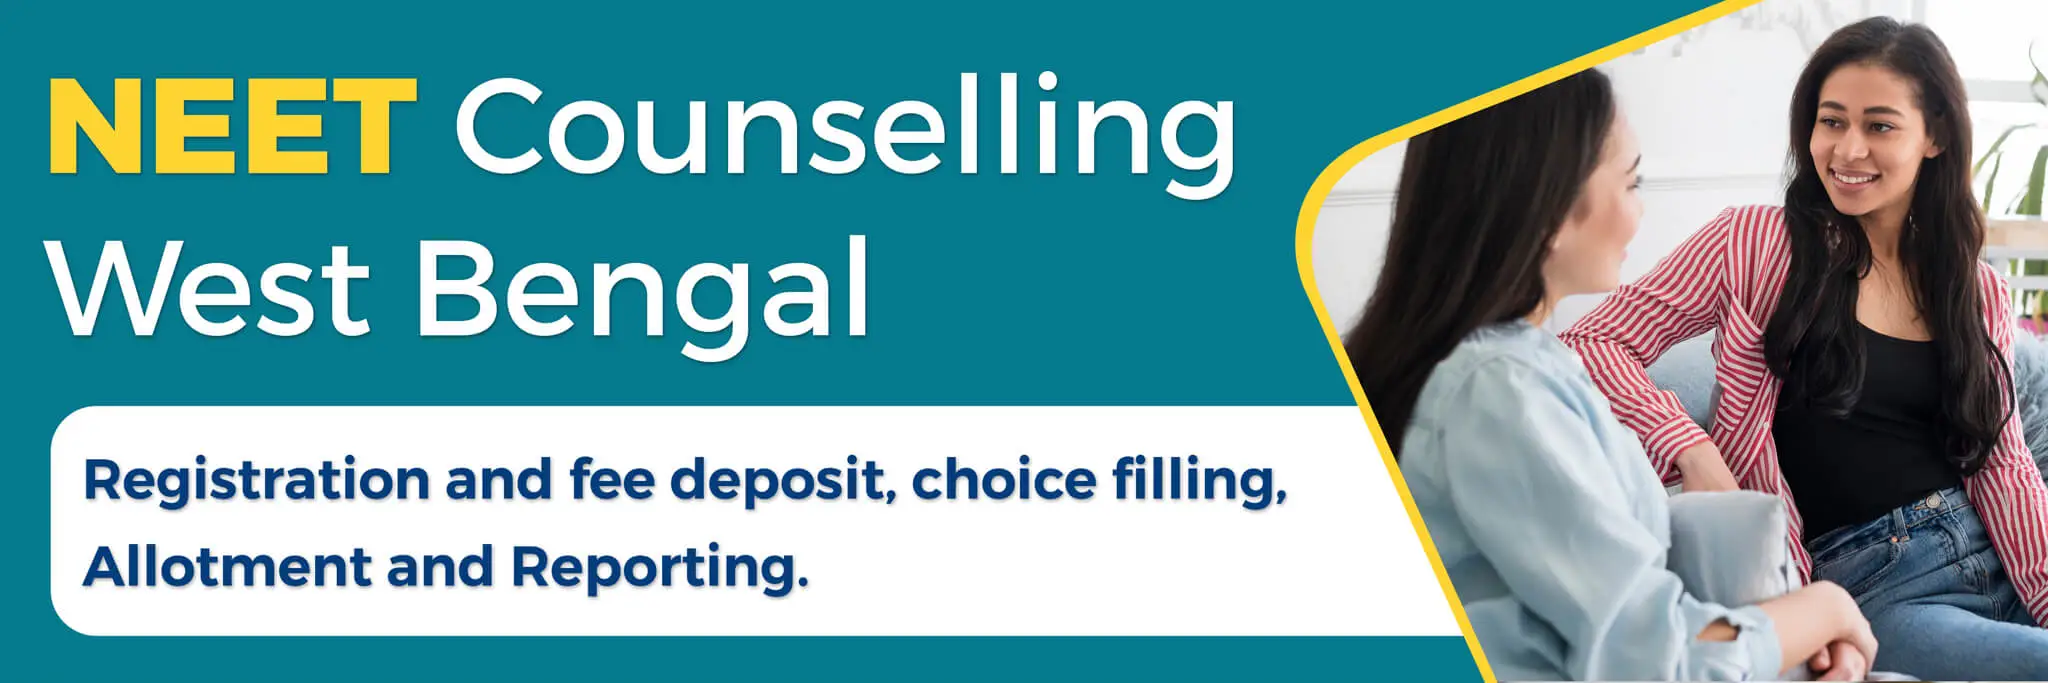 NEET Counselling West Bengal banner